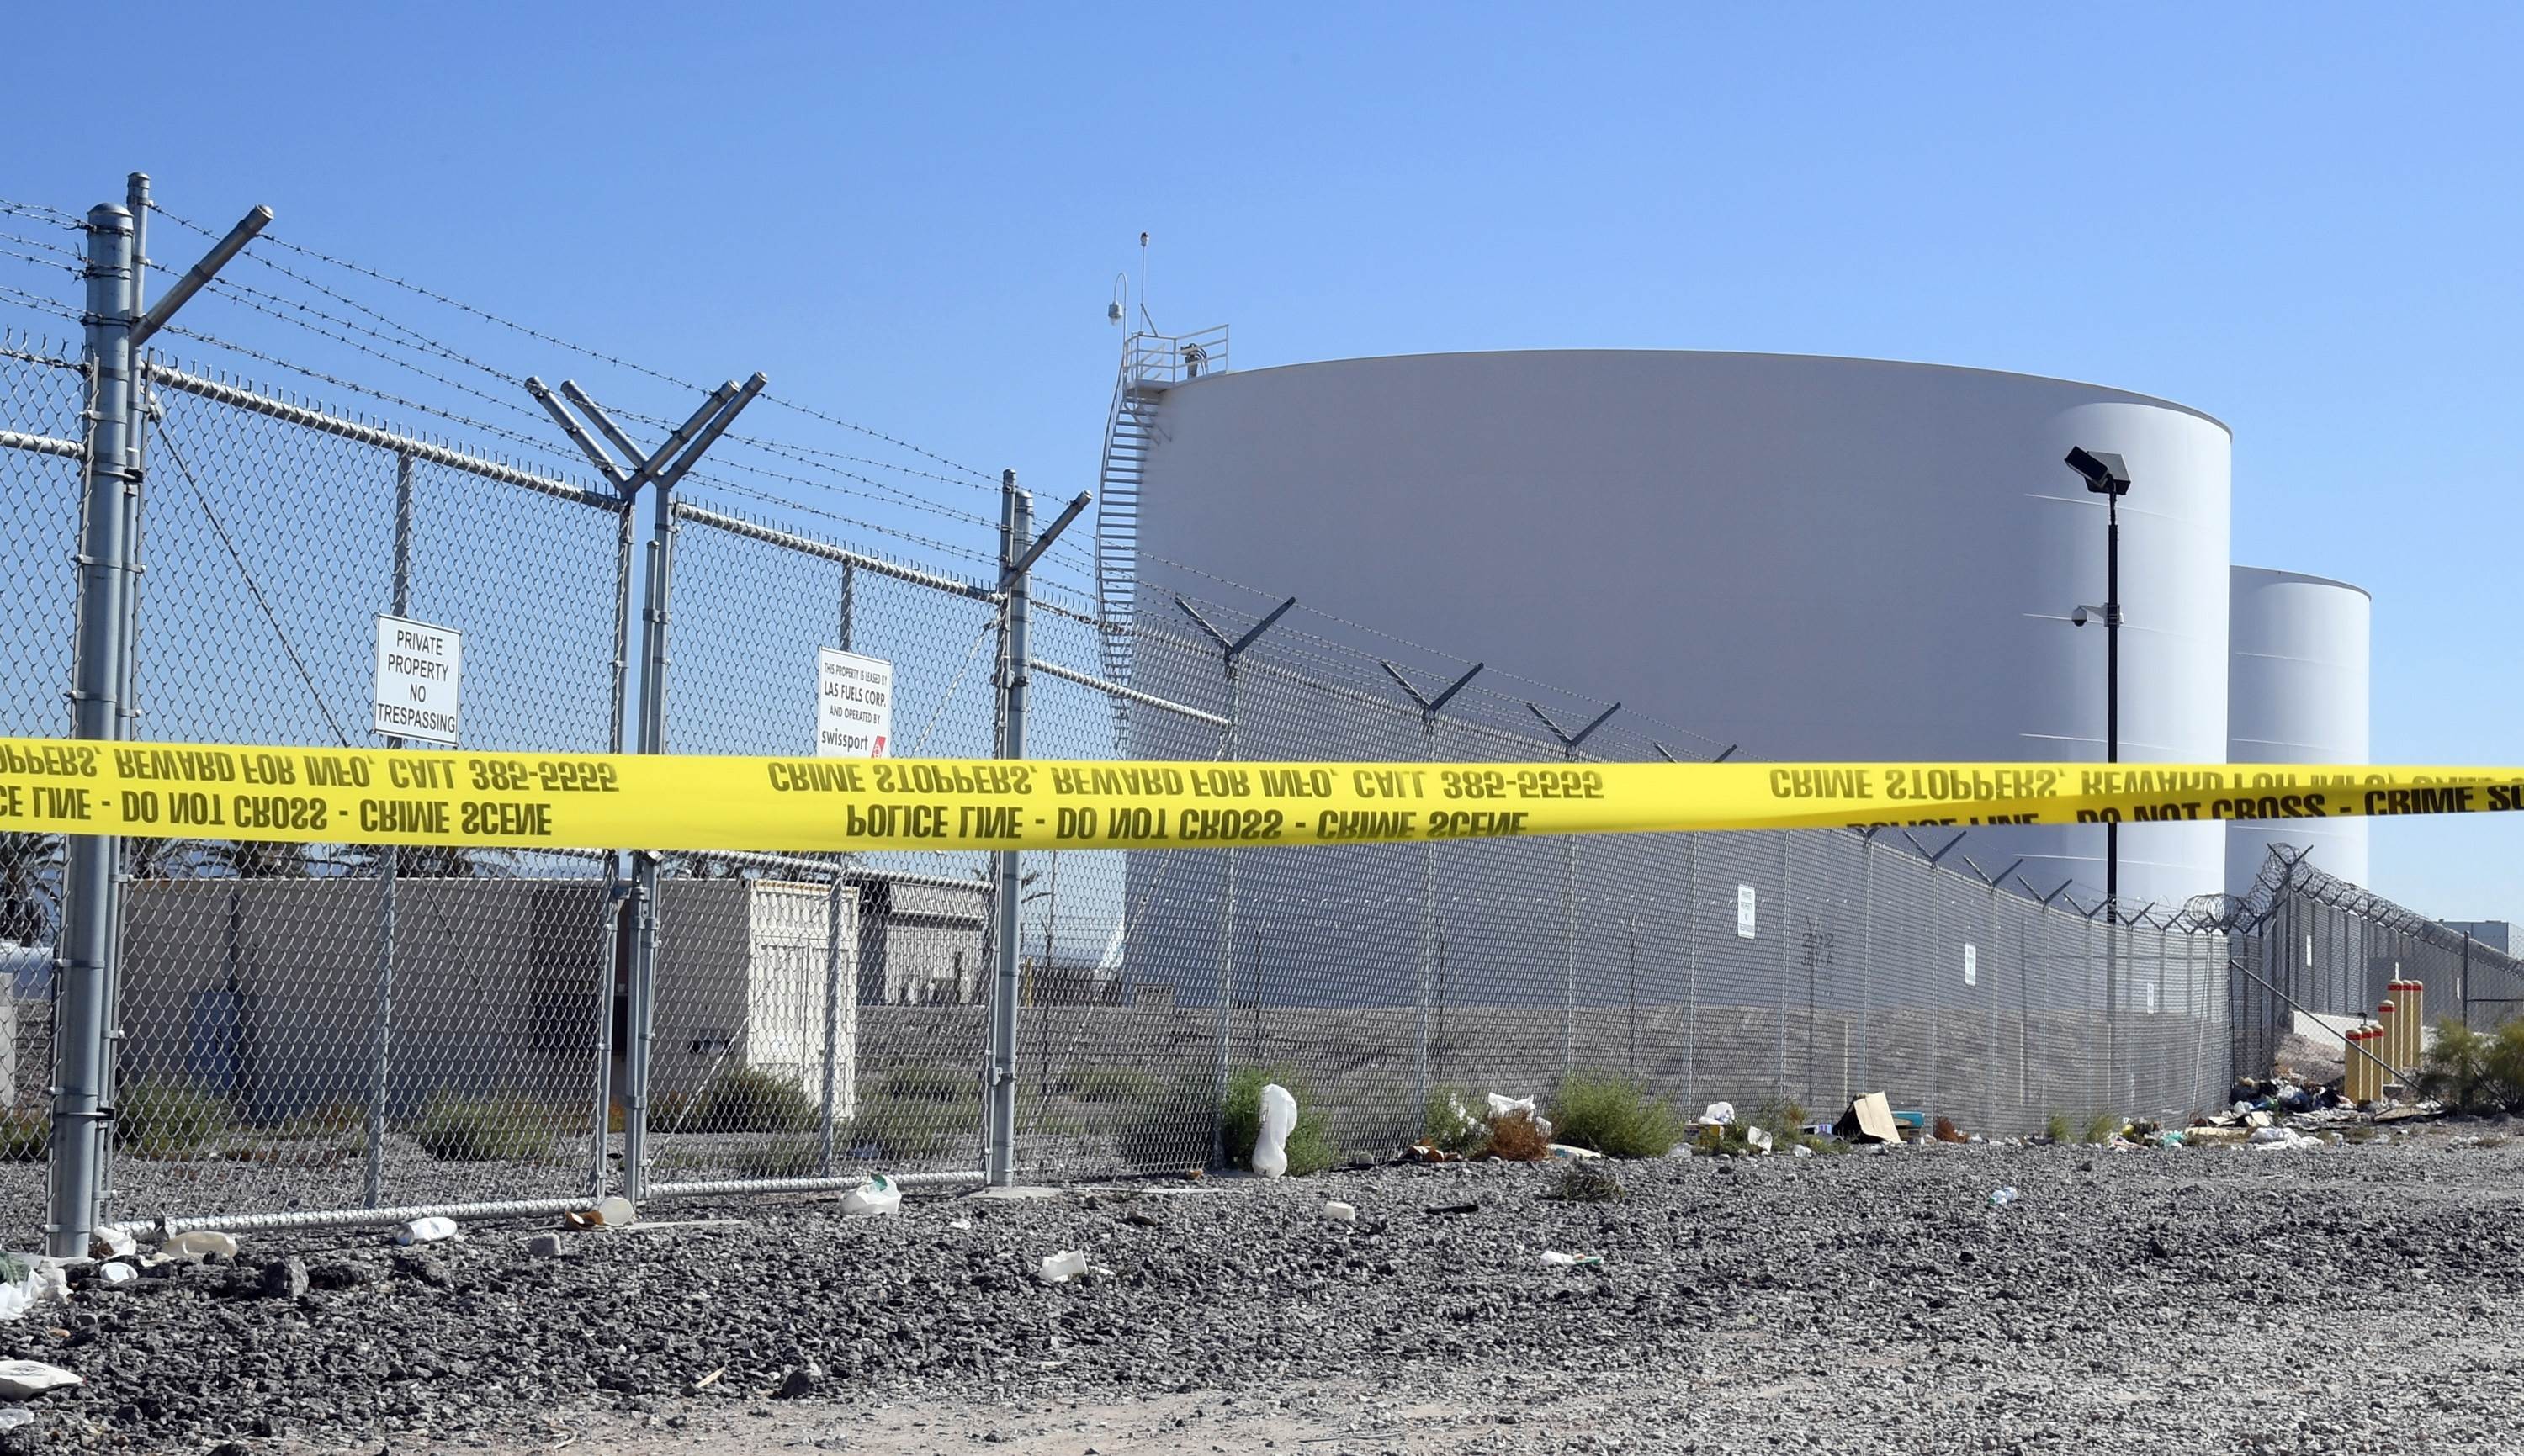 Jet fuel tanks just east of the Las Vegas Village, site of the Route 91 Harvest country music festival, that were reportedly targeted by gunman Stephen Paddock. Photo: AFP